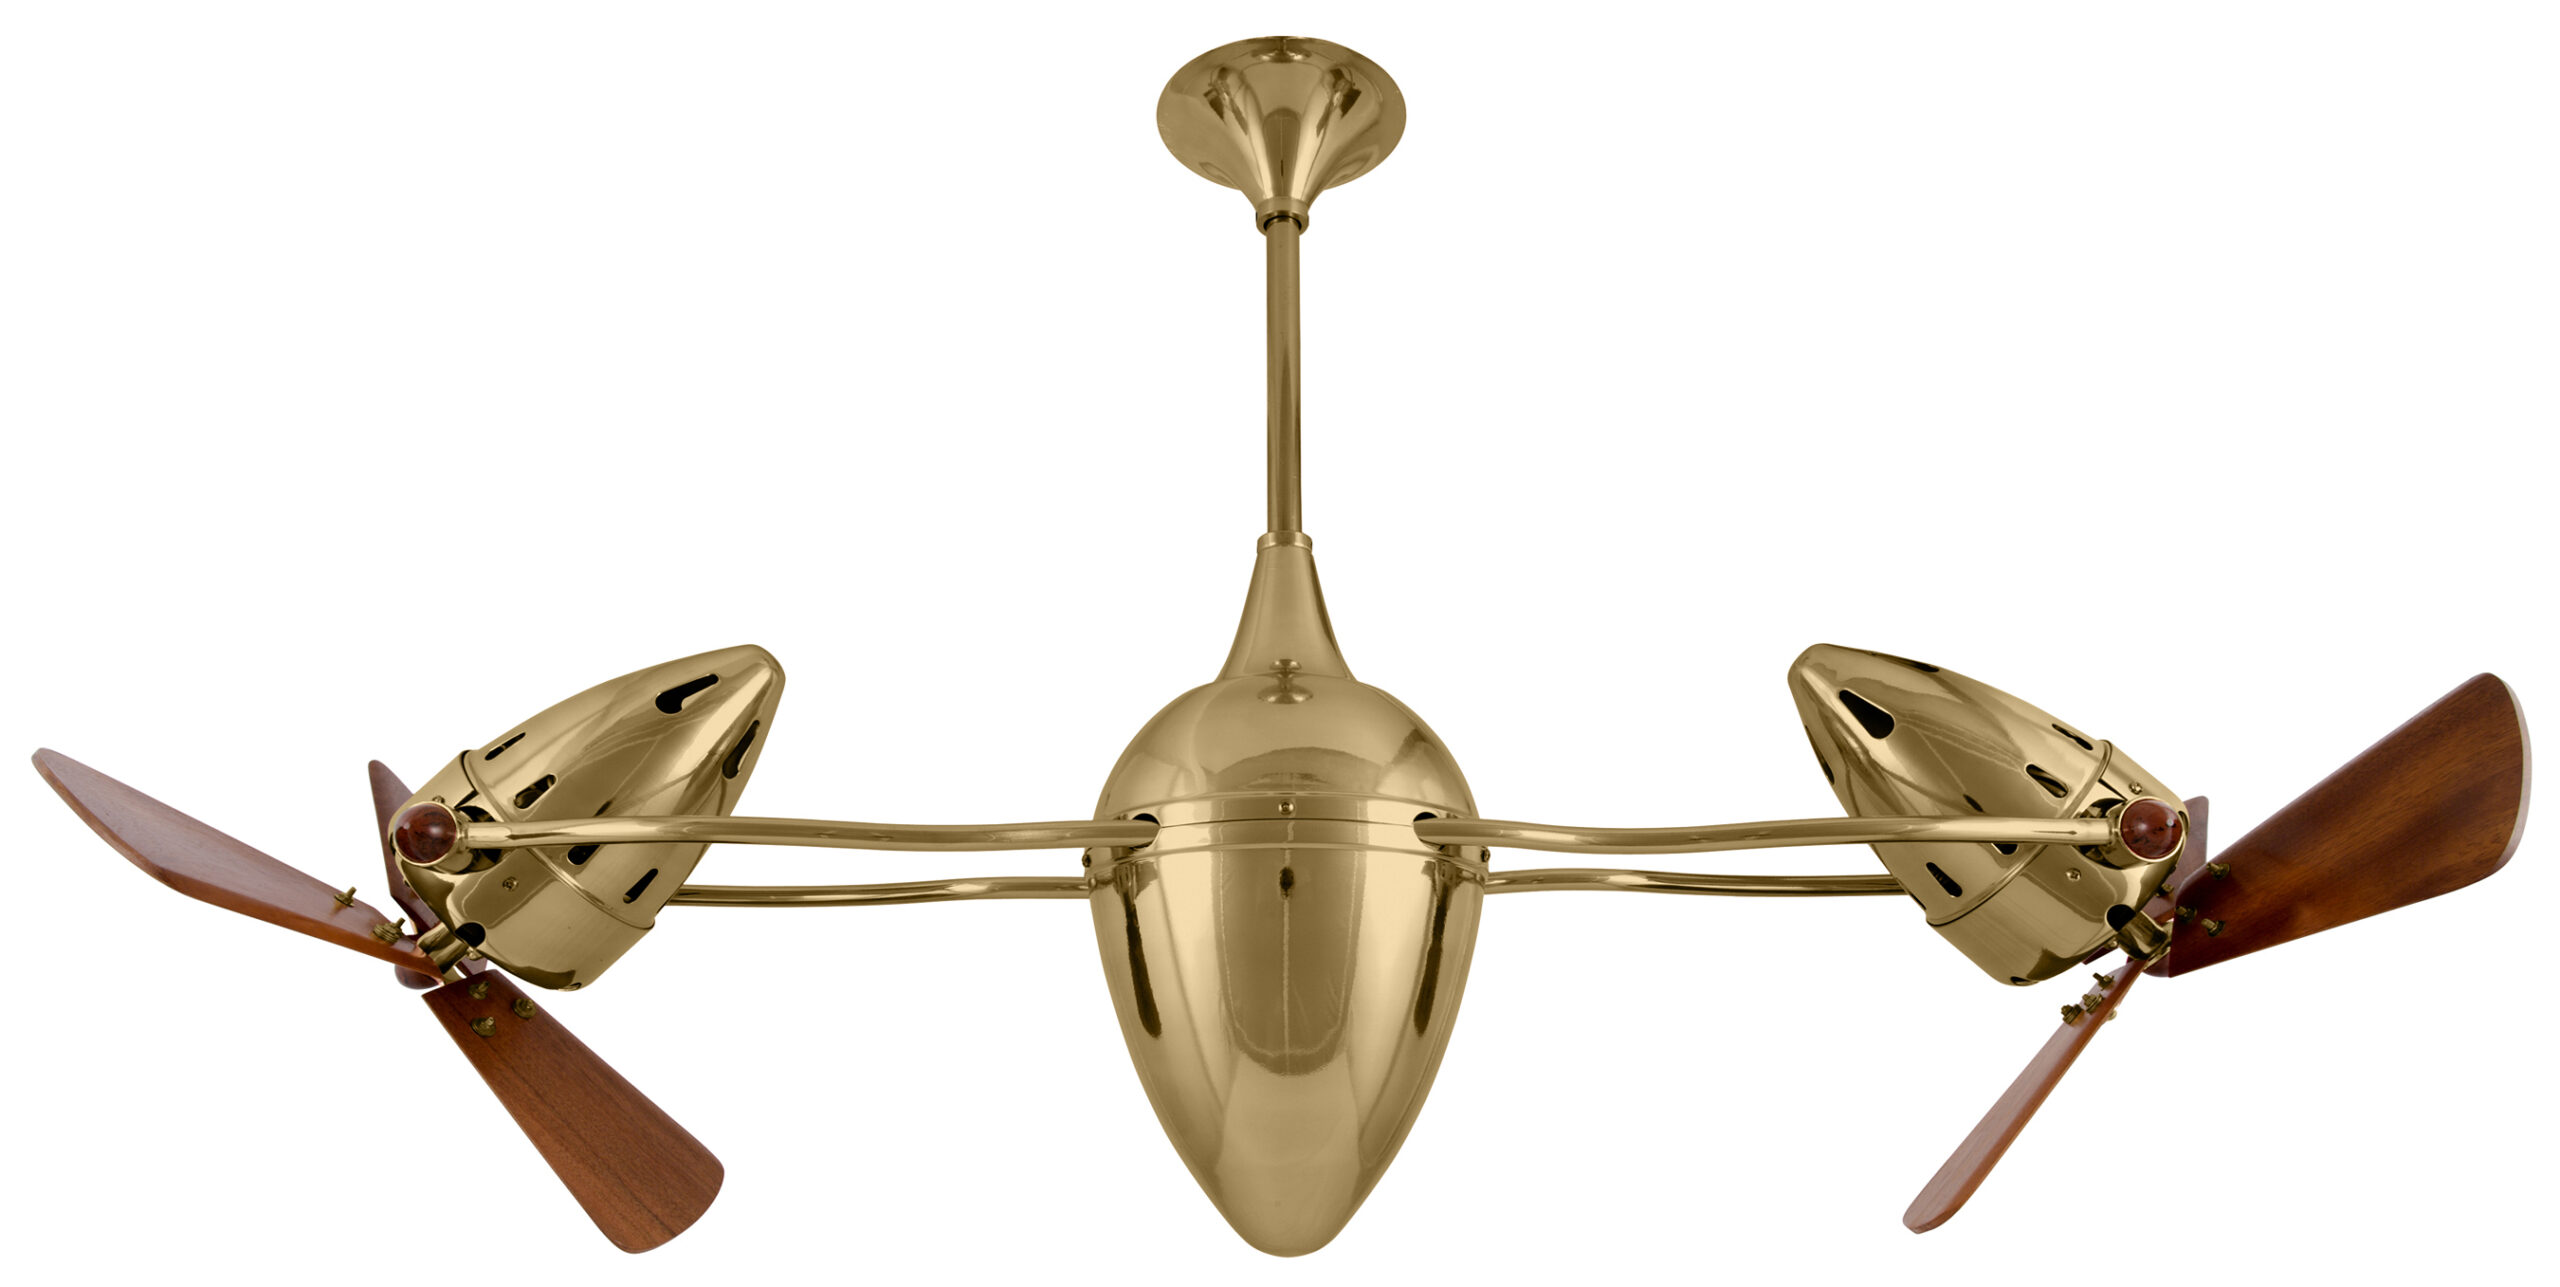 Ar Ruthiane dual headed rotational ceiling fan in polished brass with solid mahogany blades made by Matthews Fan Company.